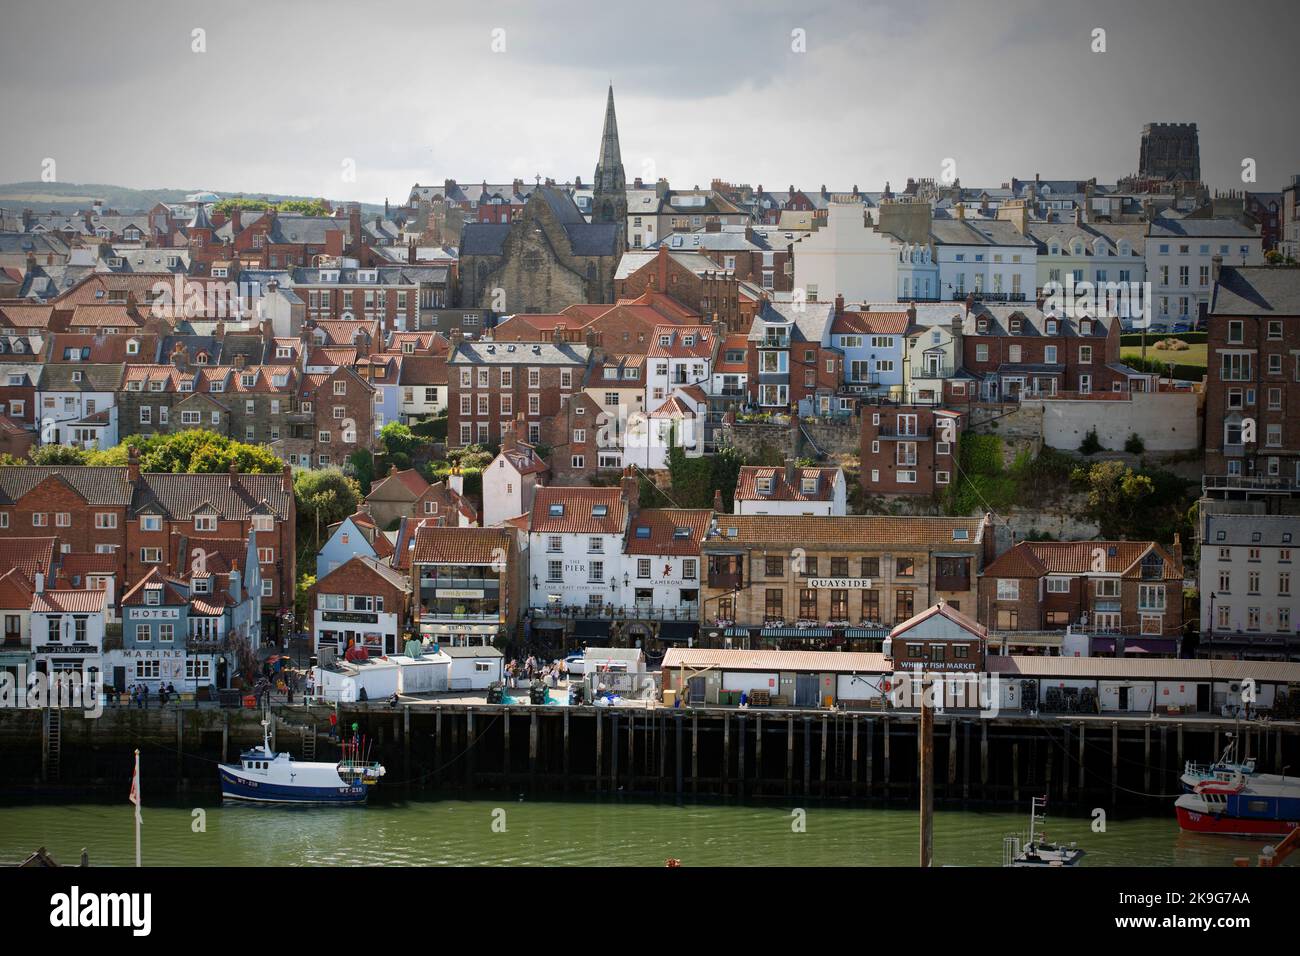 The seaside town of Whitby in North Yorkshire in Northern England. Stock Photo